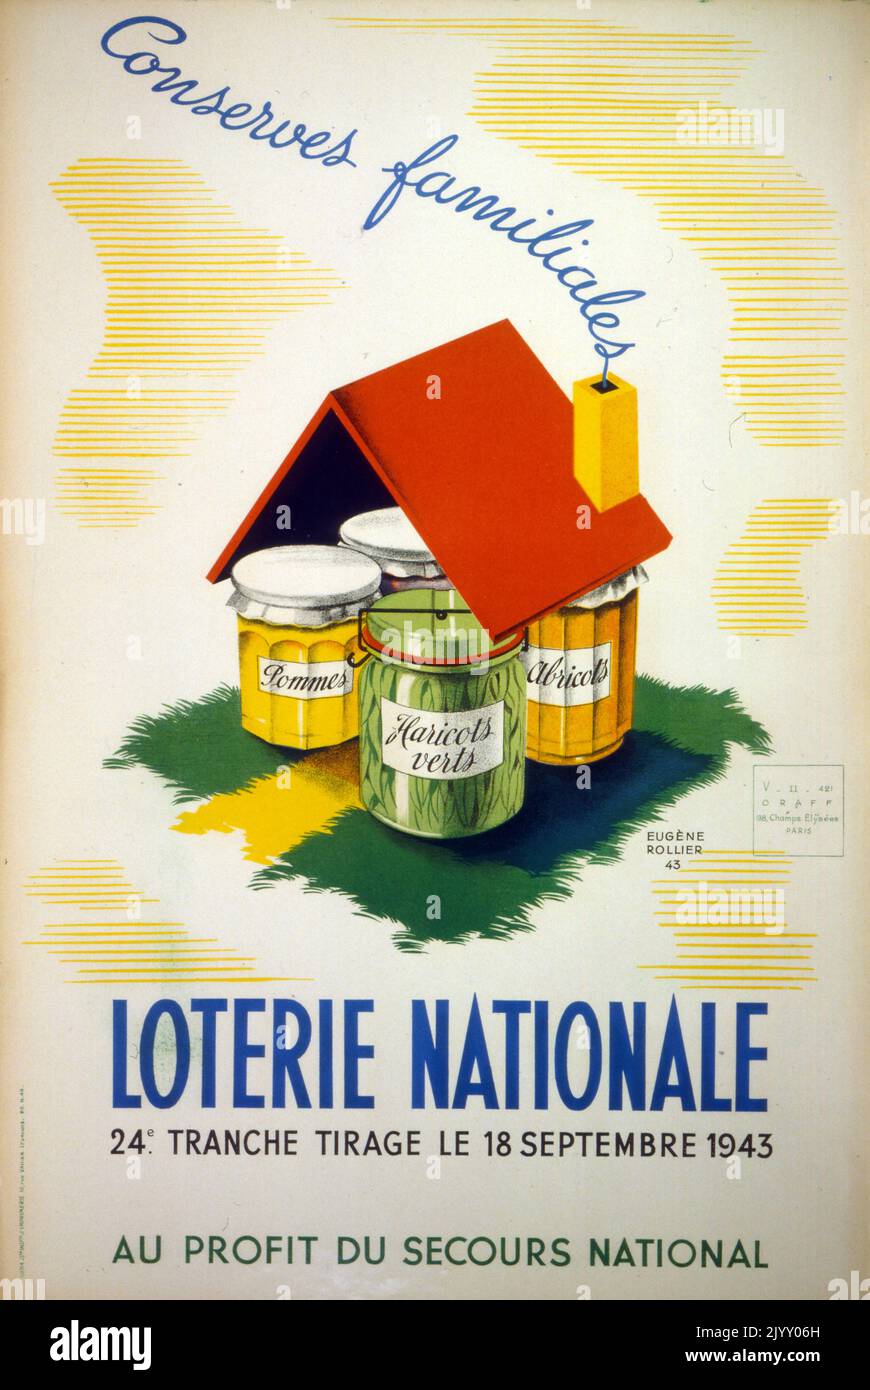 French 'National Lottery' Poster 1945. highlighting a campaign to fund public parks for war orphans, after the devastation of World War Two and occupation of France. Stock Photo